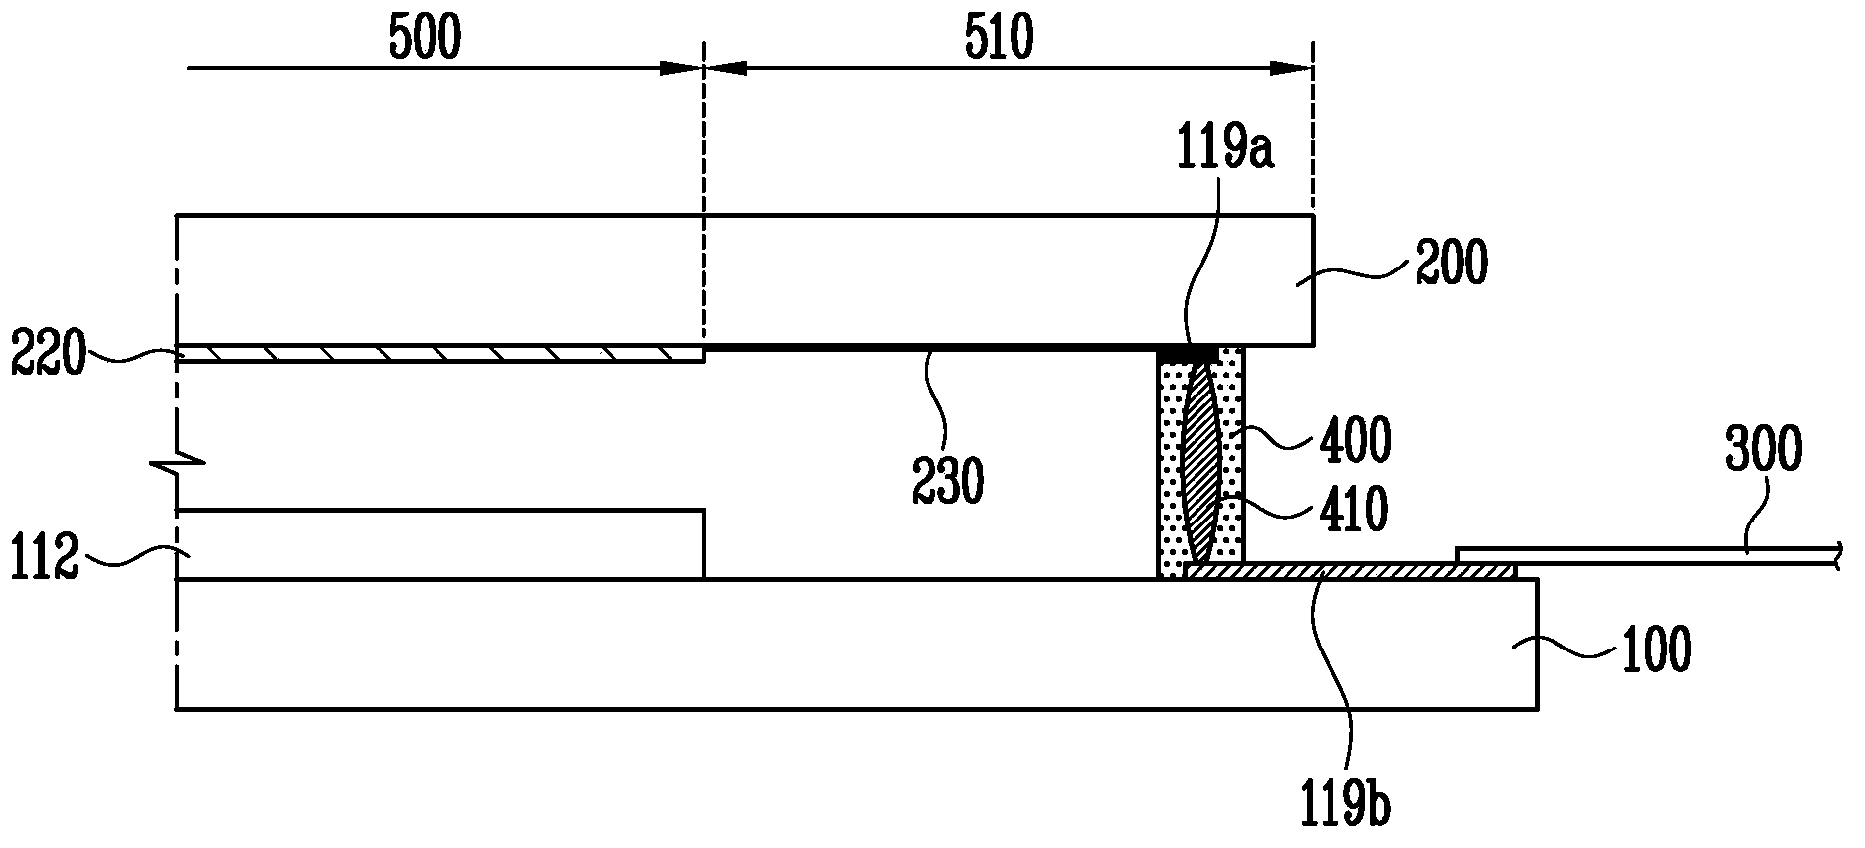 Display device having touch screen sensing function